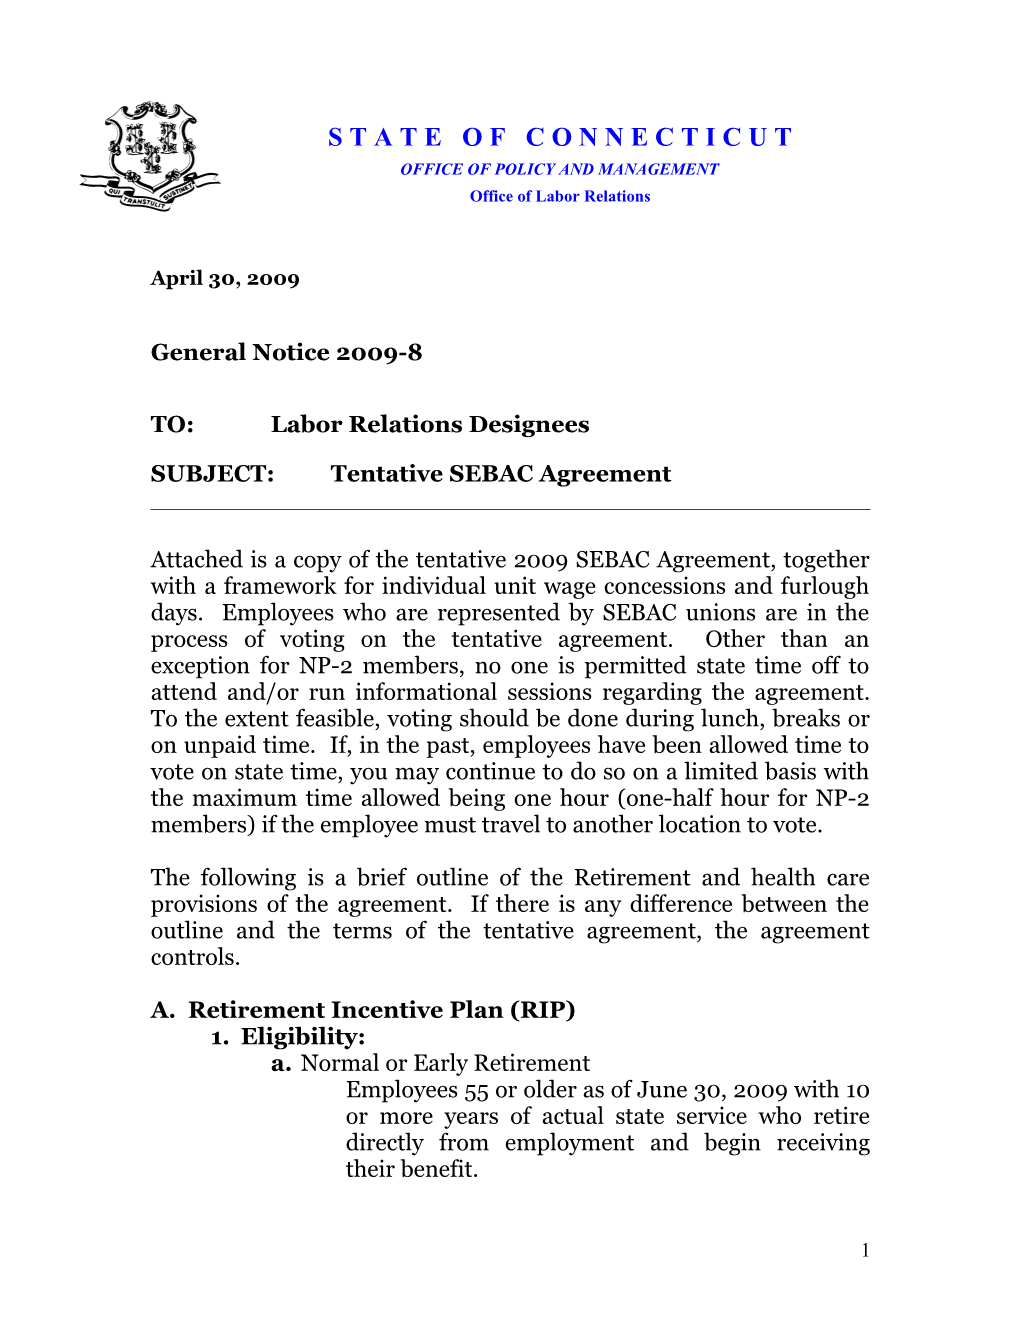 Attached Is A Copy Of The Tentative 2009 SEBAC Agreement, Together With A Framework For Individual Unit Wage Concessions And Furlough Days